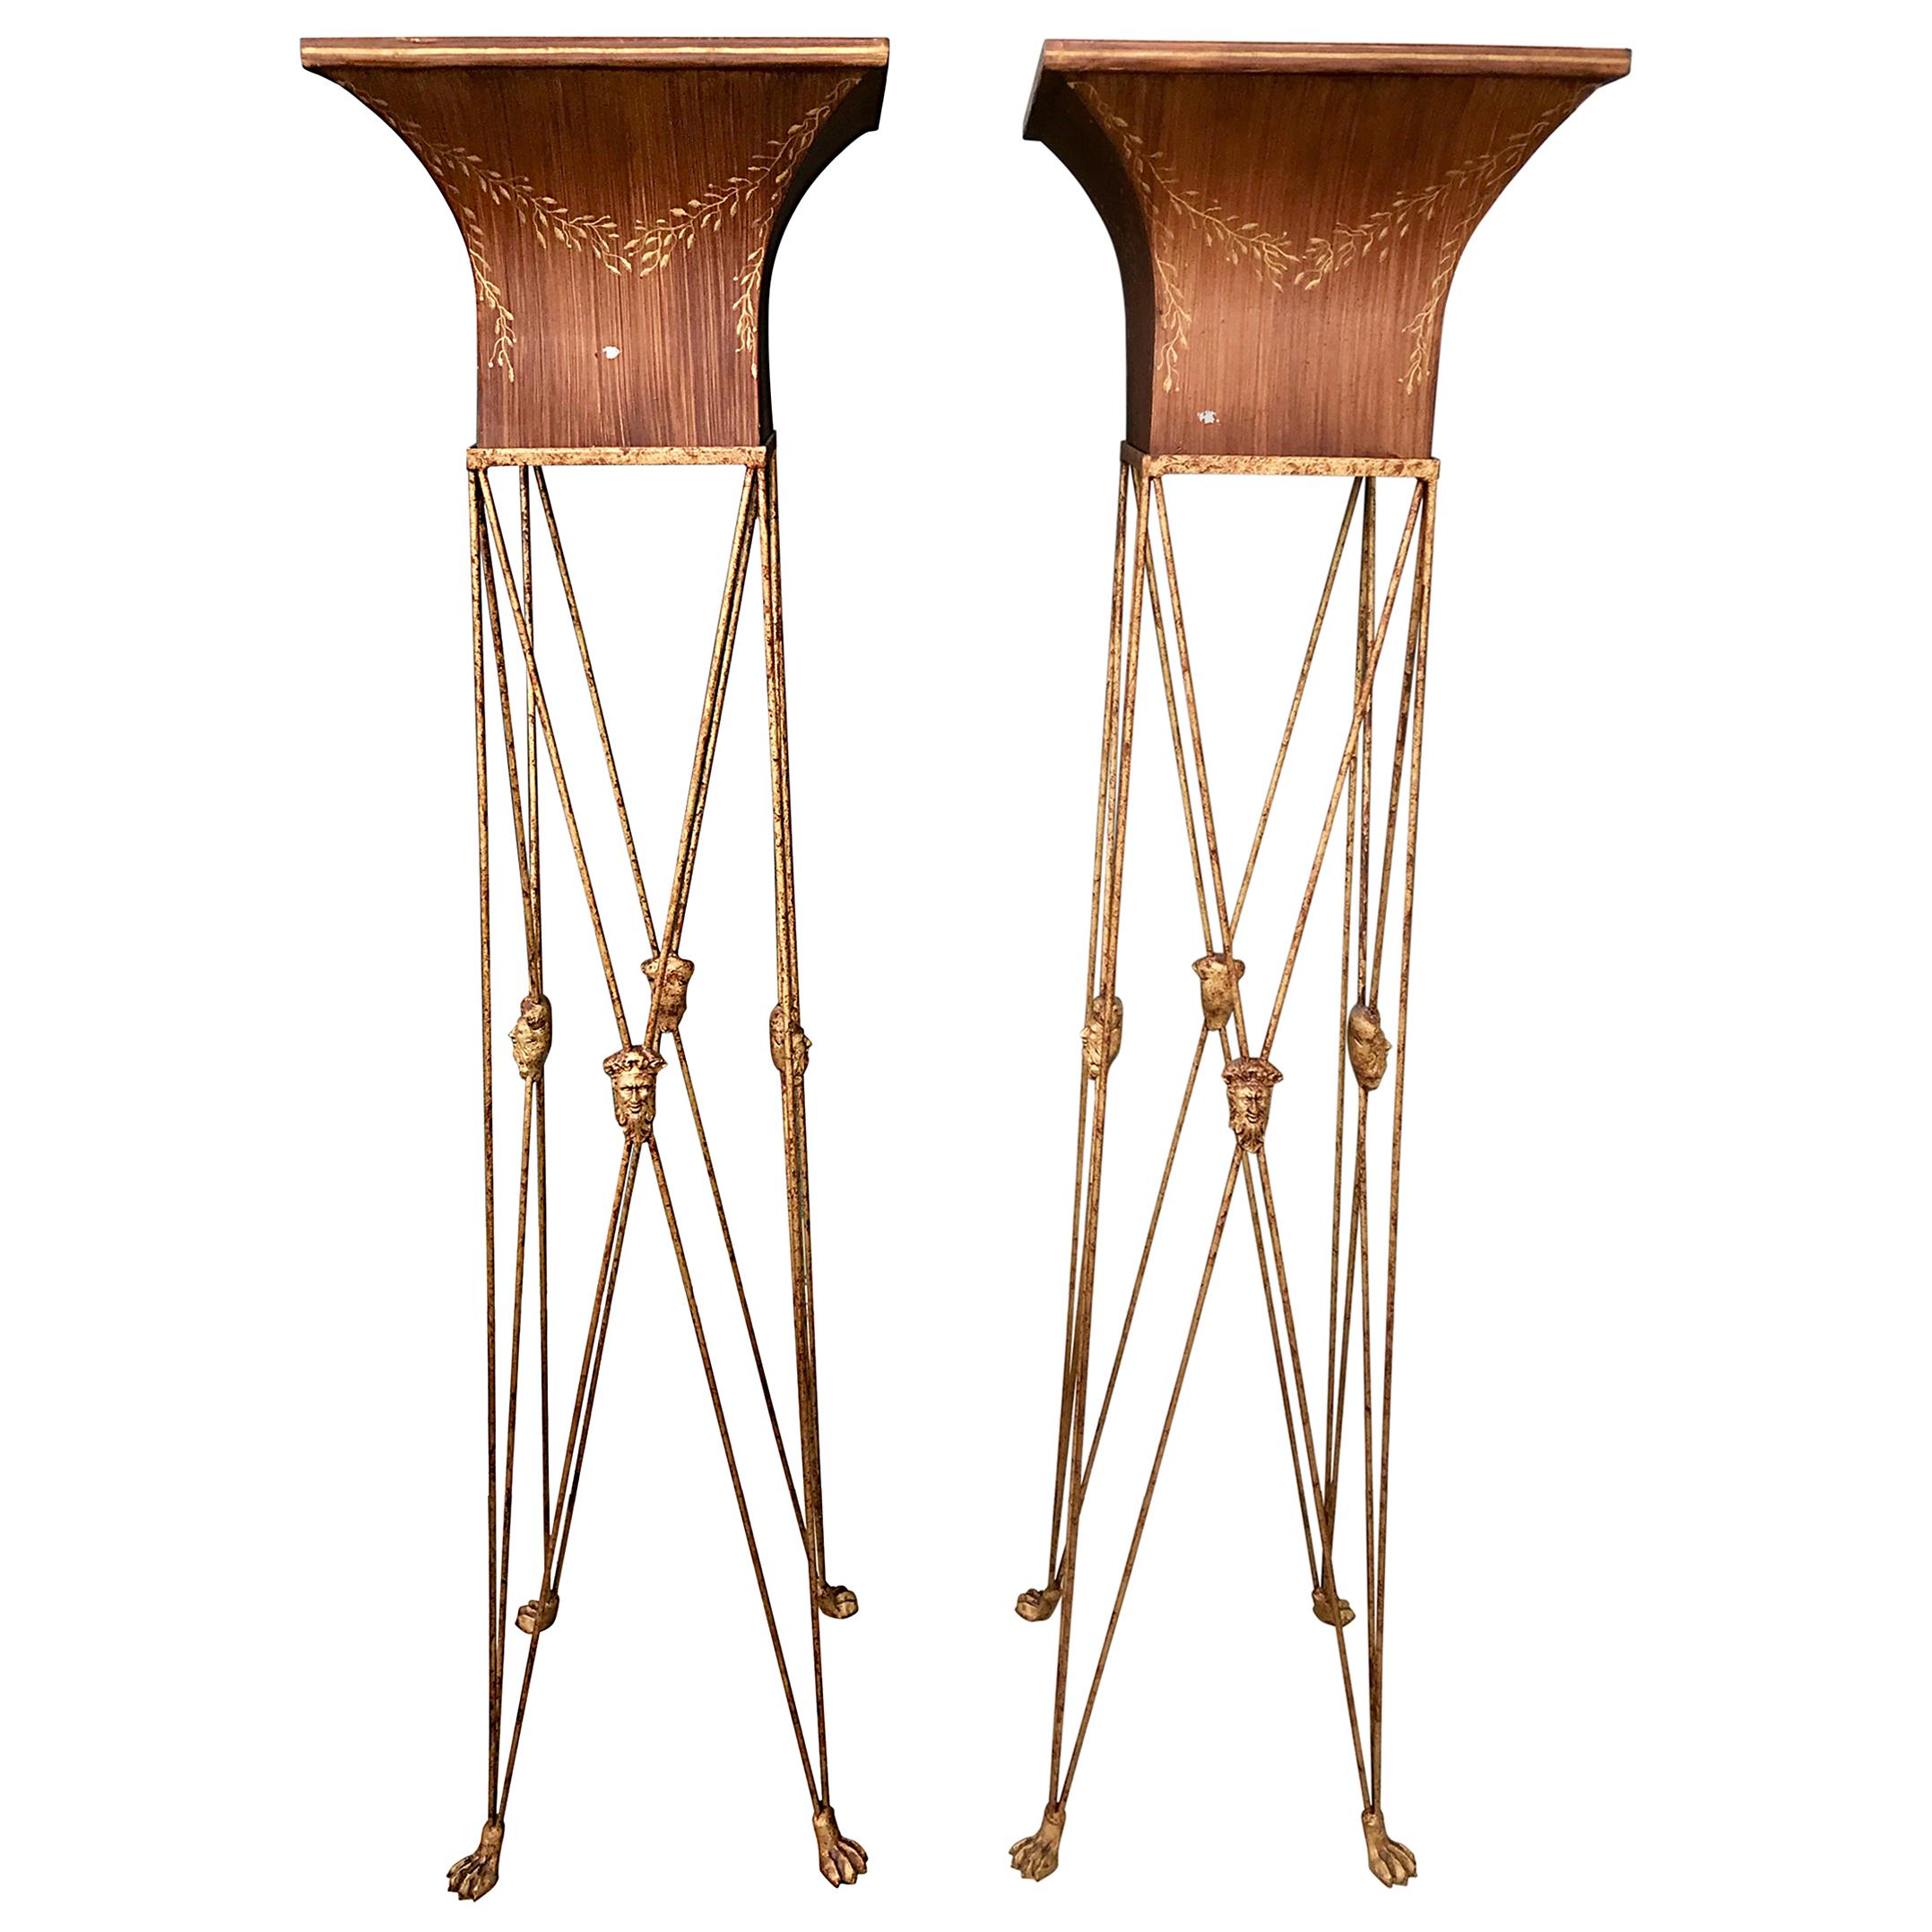 Pair of Italian Neoclassical Tole Plant Stands